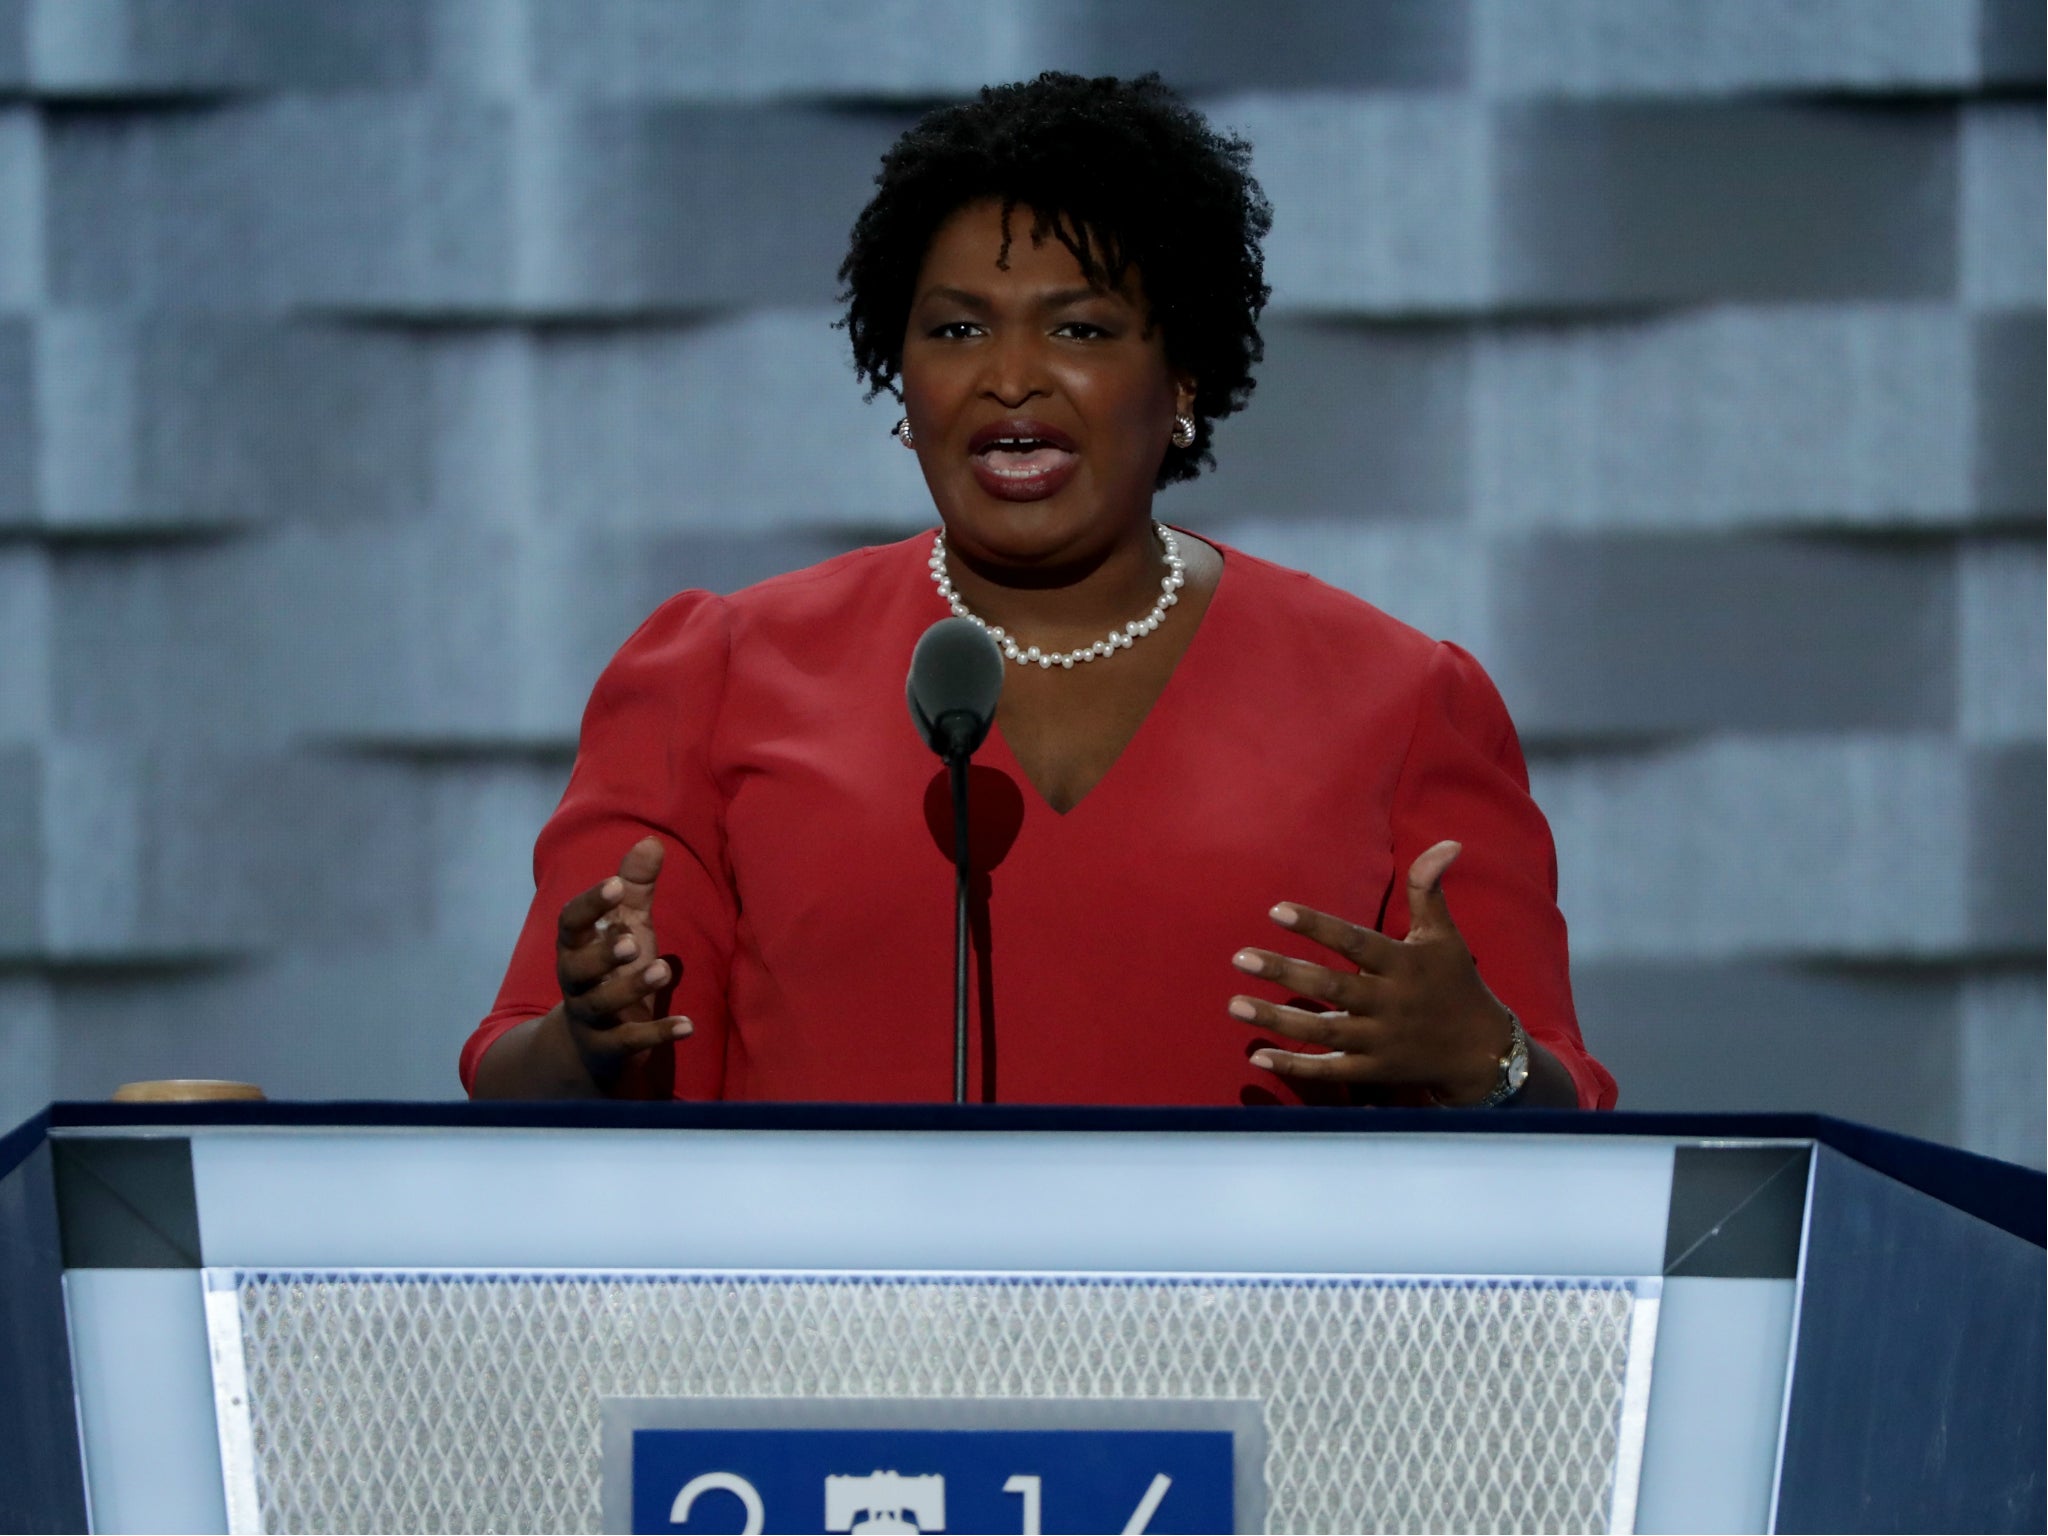 Former Georgia General Assembly member Stacey Abrams has gotten an endorsement from Hillary Clinton for her run for governor.